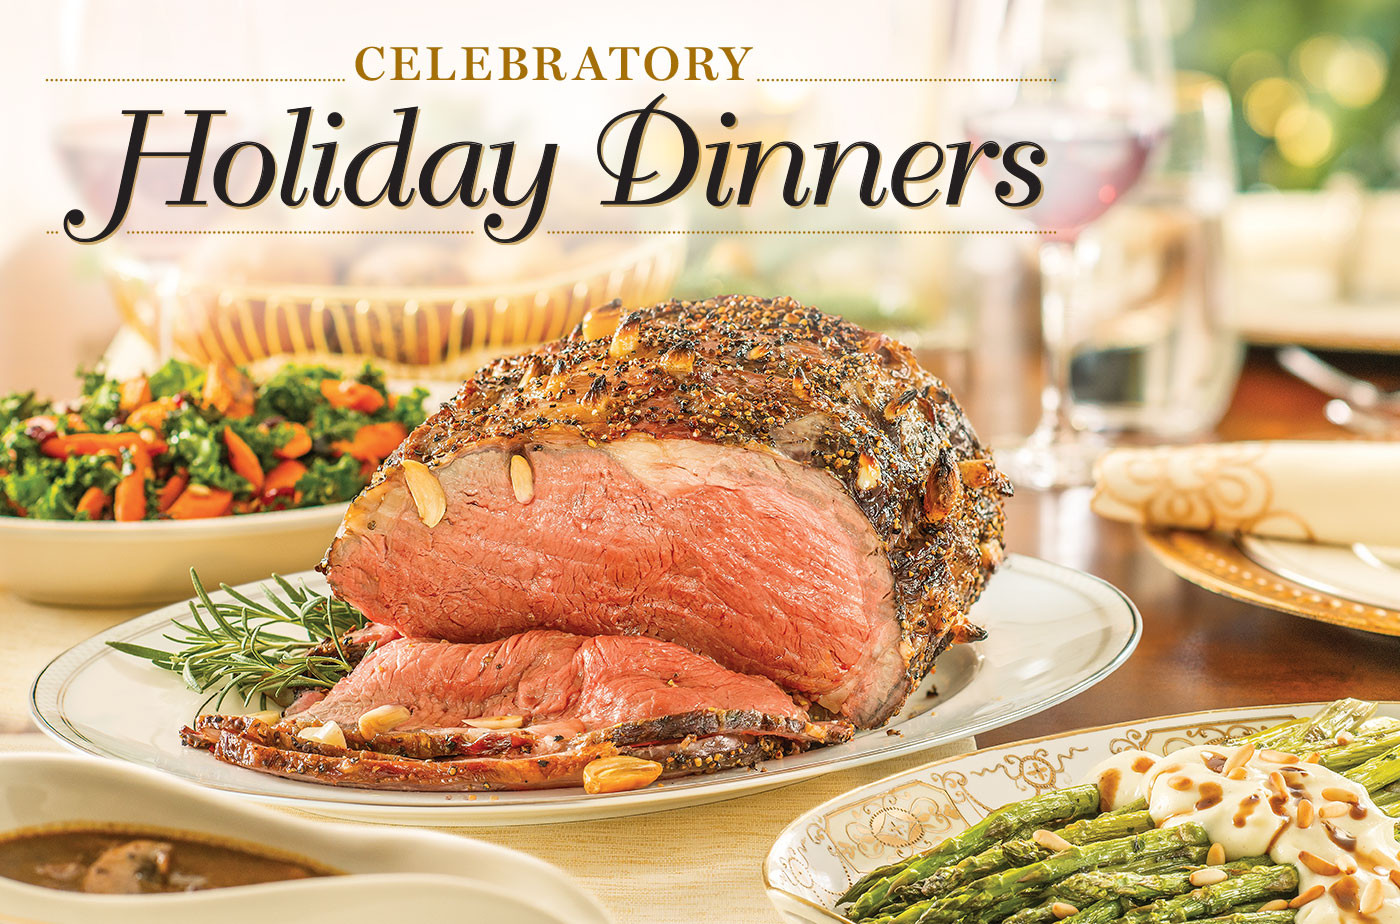 Wegmans Christmas Dinner Catering / Thanksgiving Christmas Other Holiday Celebration Recipes ...